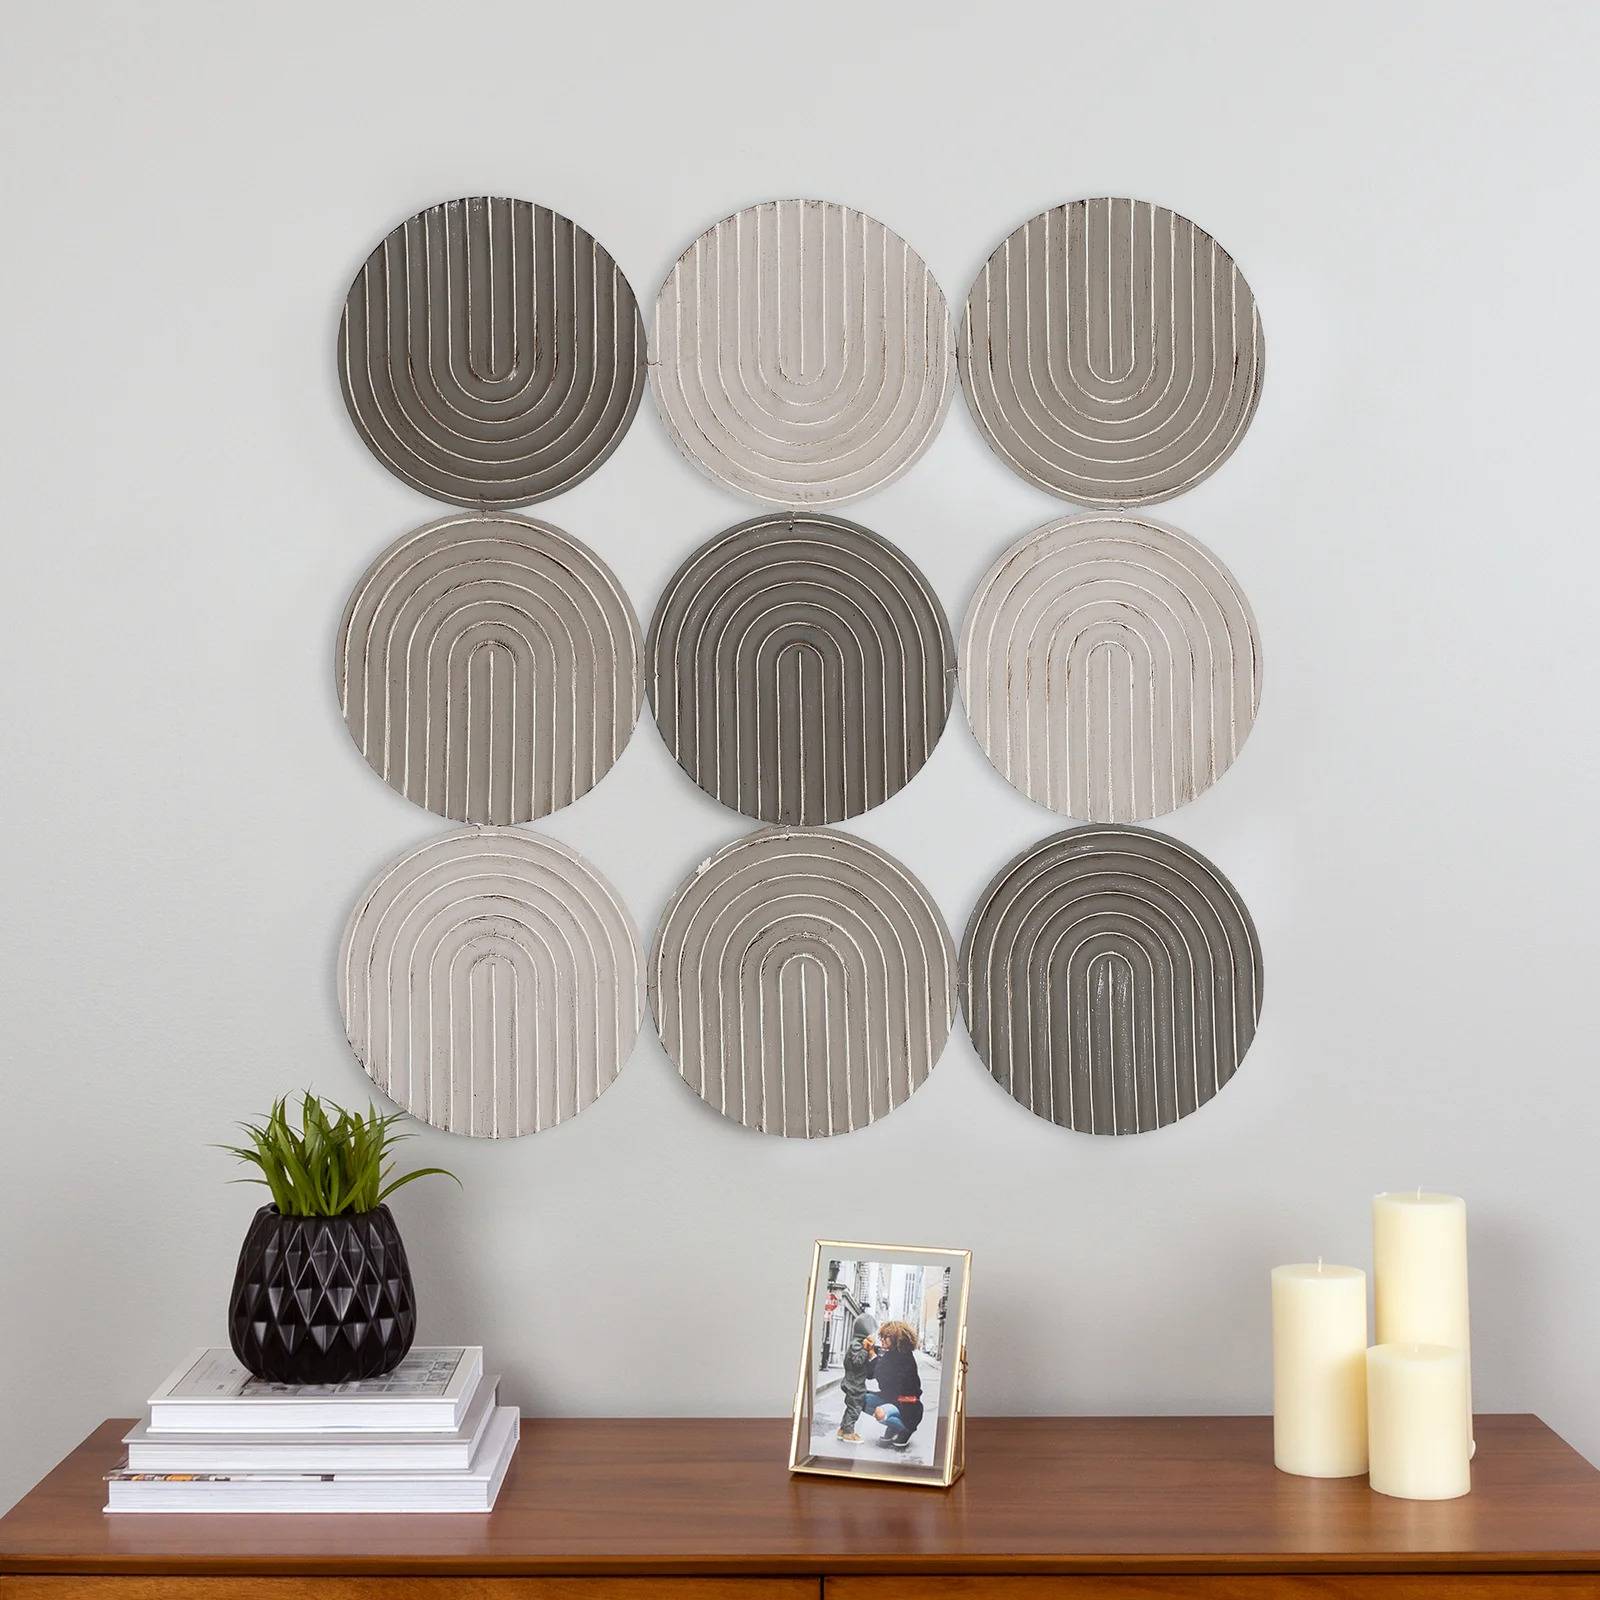 Taupe wall decor from Wayfair